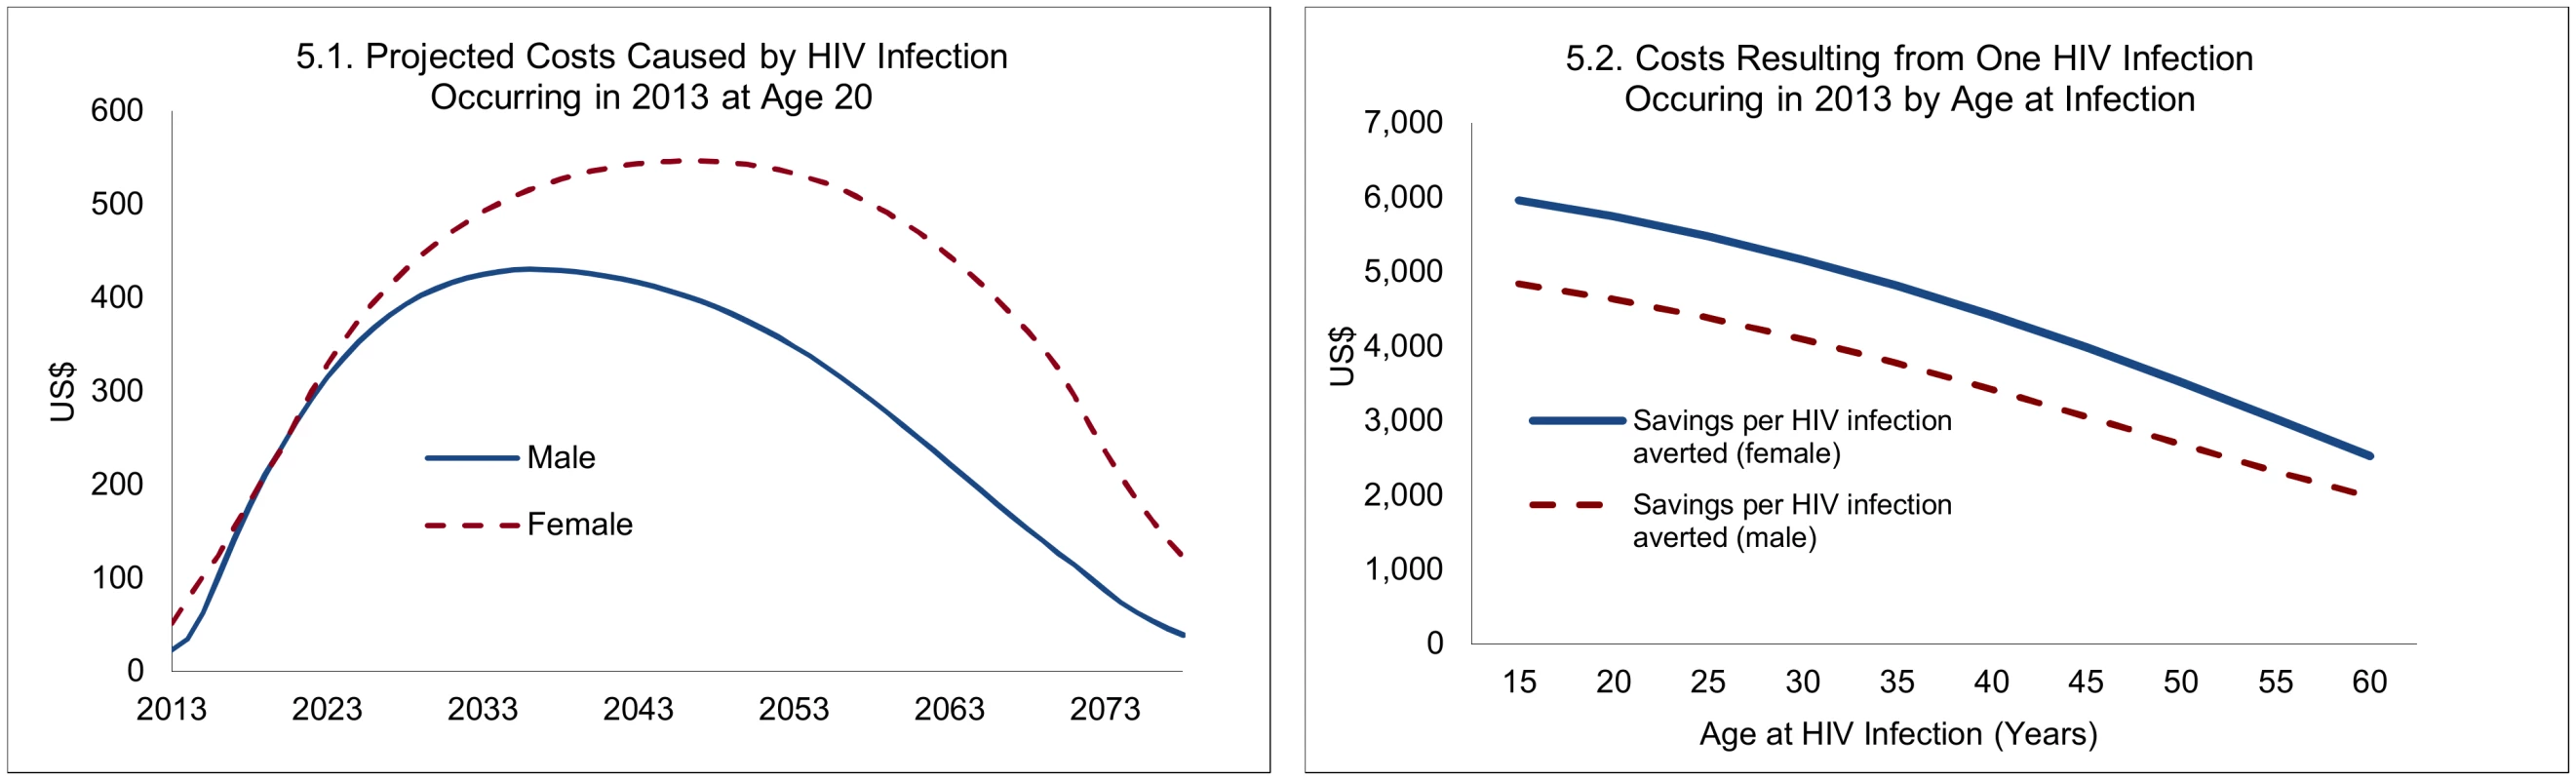 Projected costs caused by one new HIV infection, 2013.